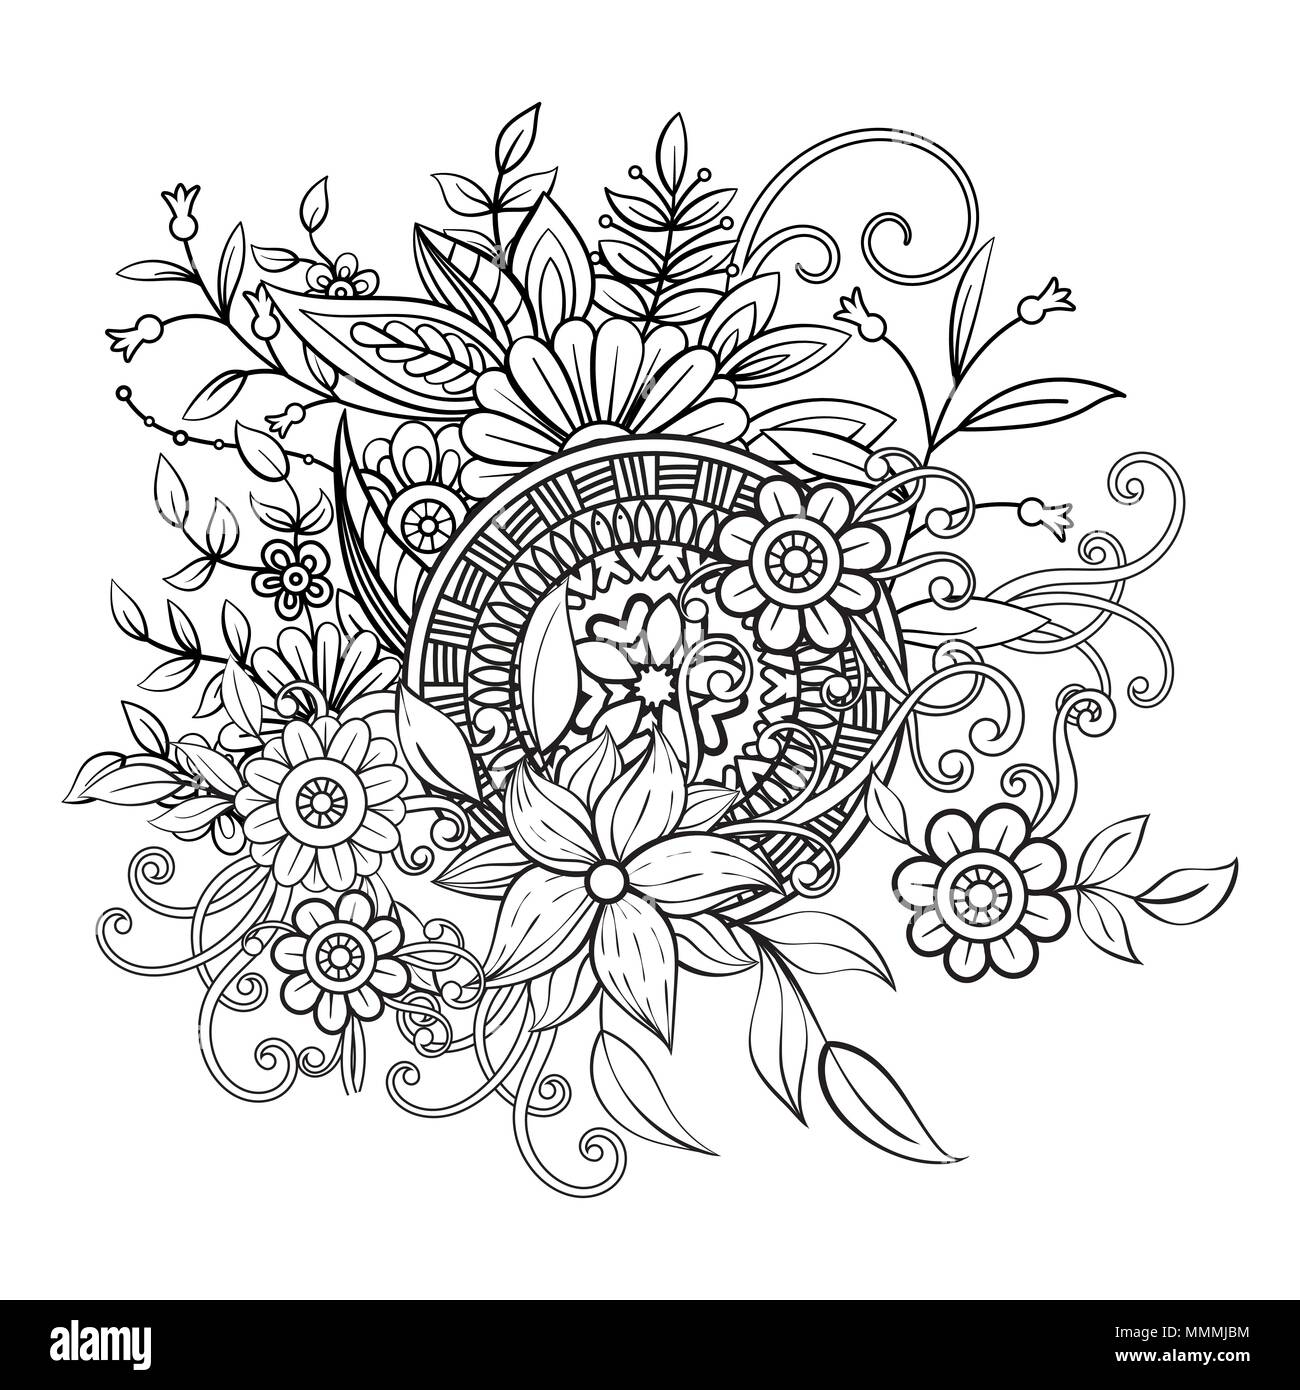 Adult Colouring Books: An Art Therapy Anti-Stress Colouring Book for Adults